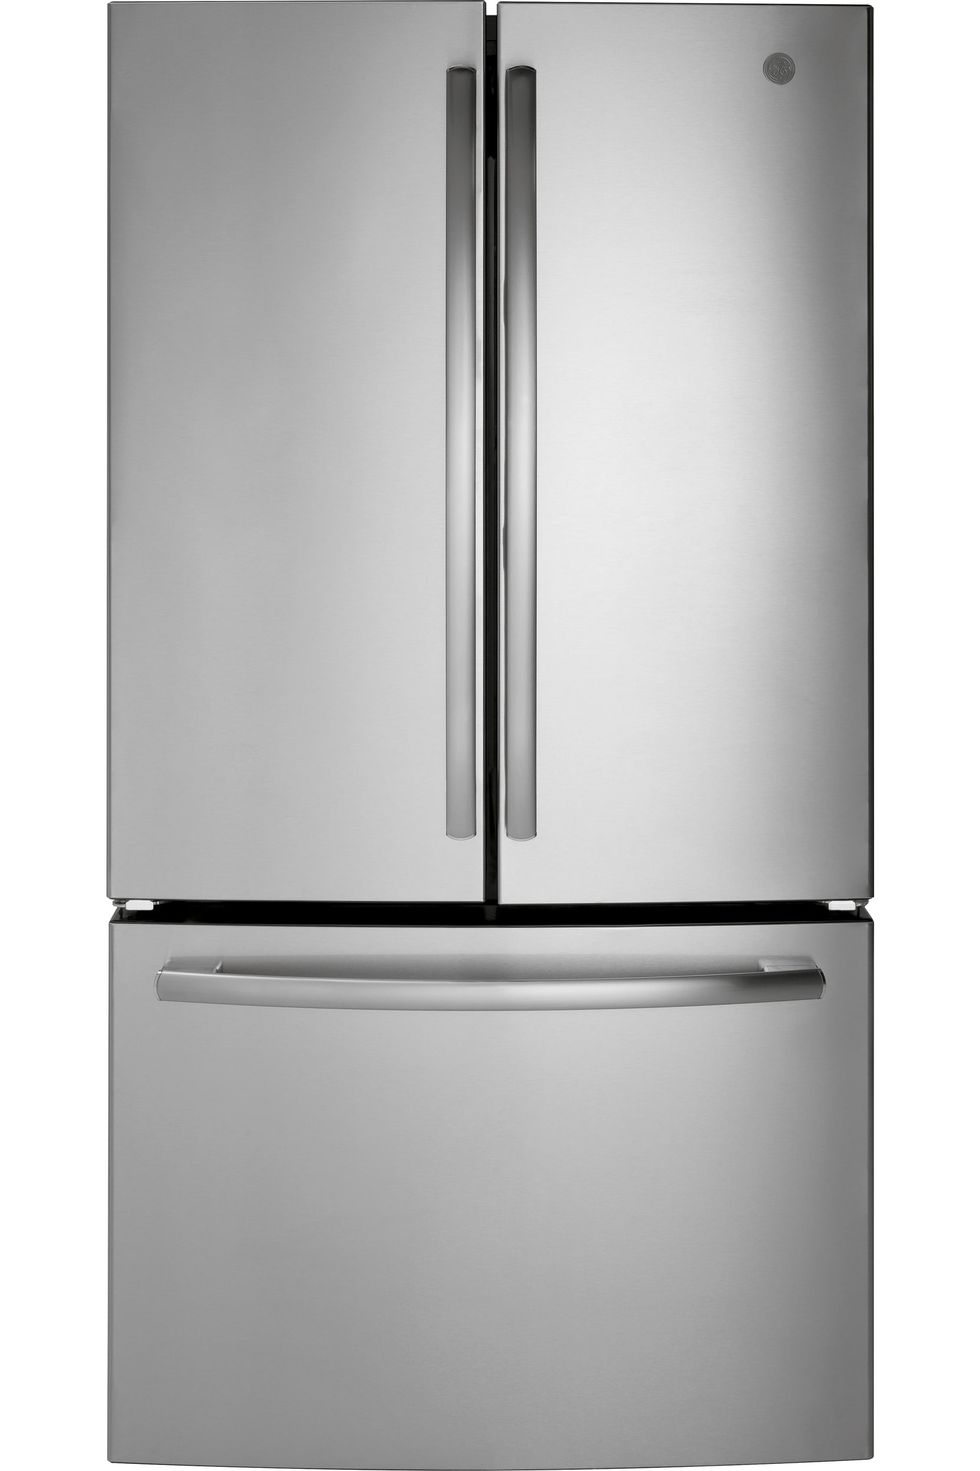 What Type of Fridge is Best For Me?